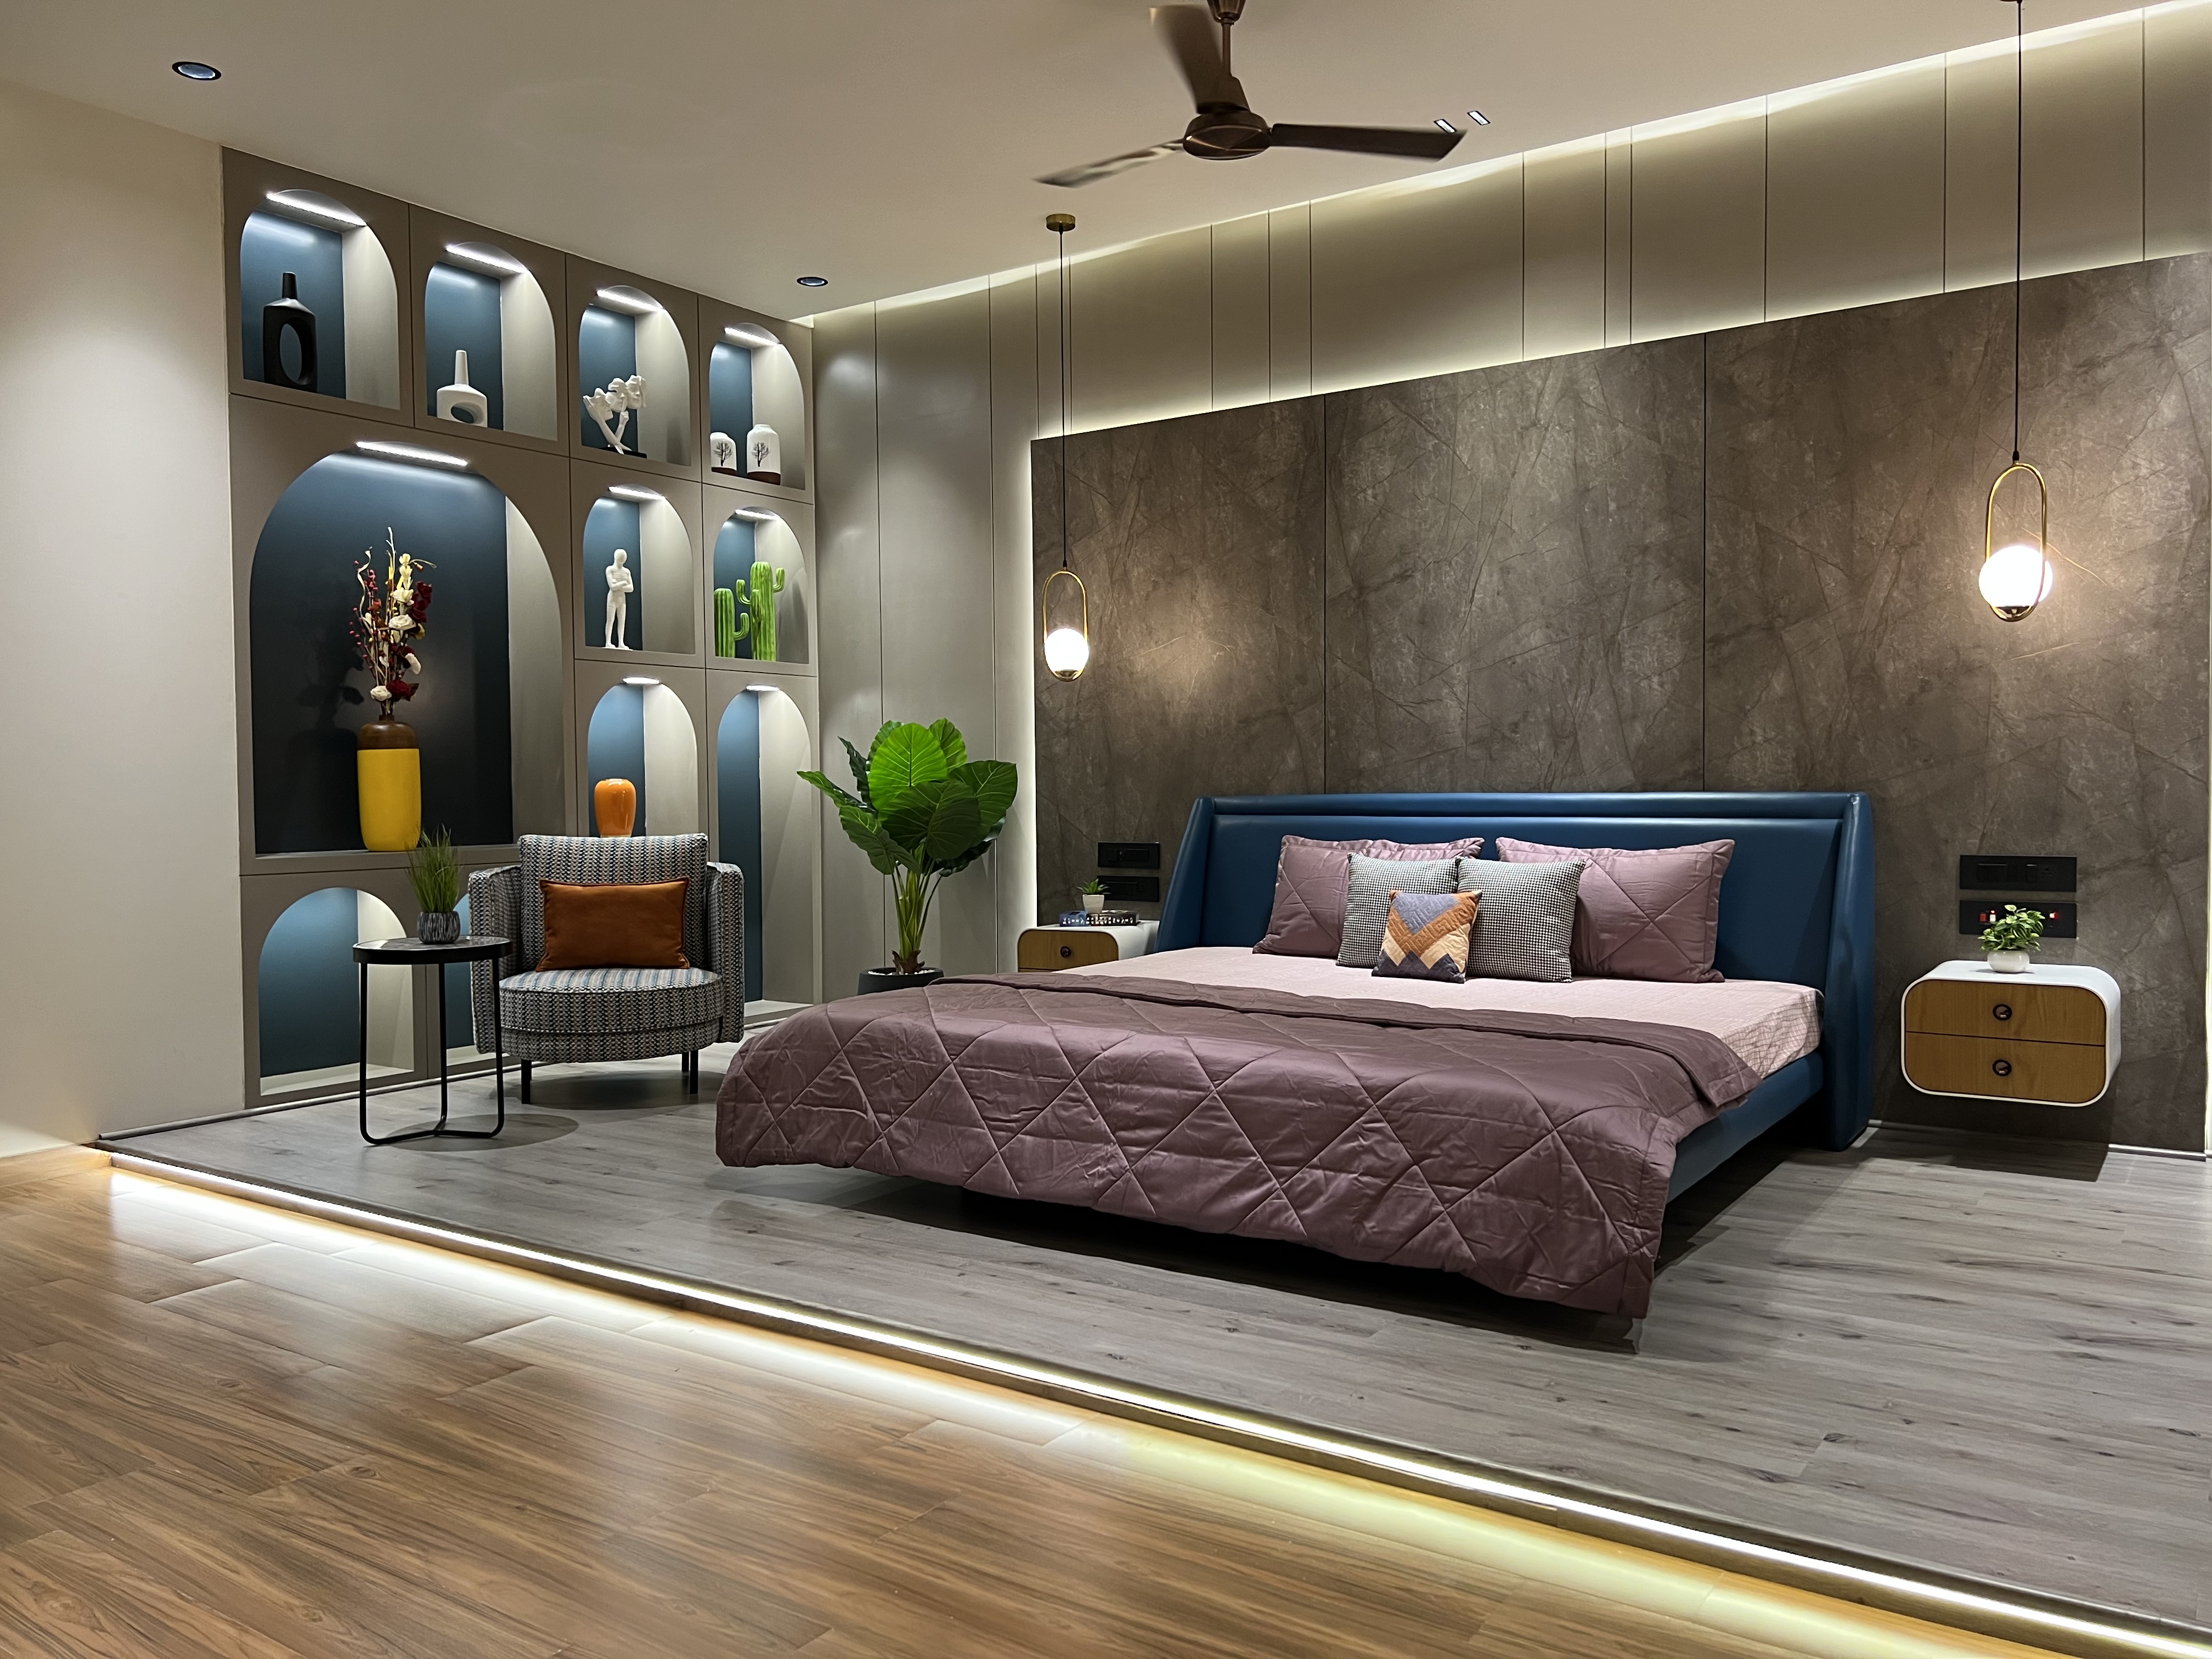 Bedroom Design With Furniture And Lights